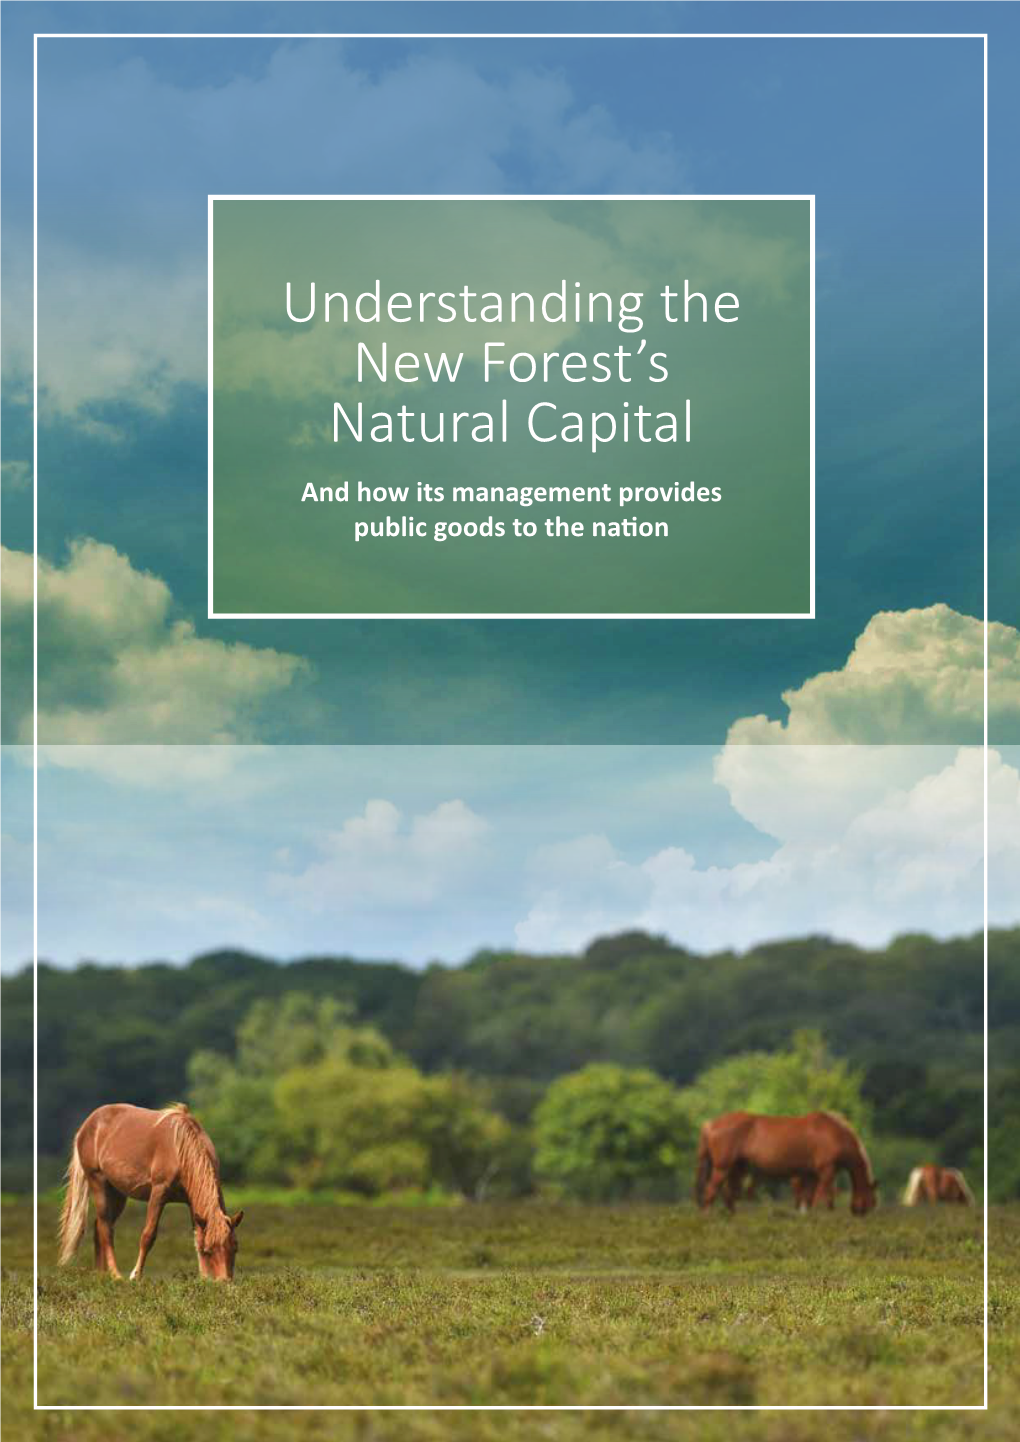 Understanding the New Forest's Natural Capital